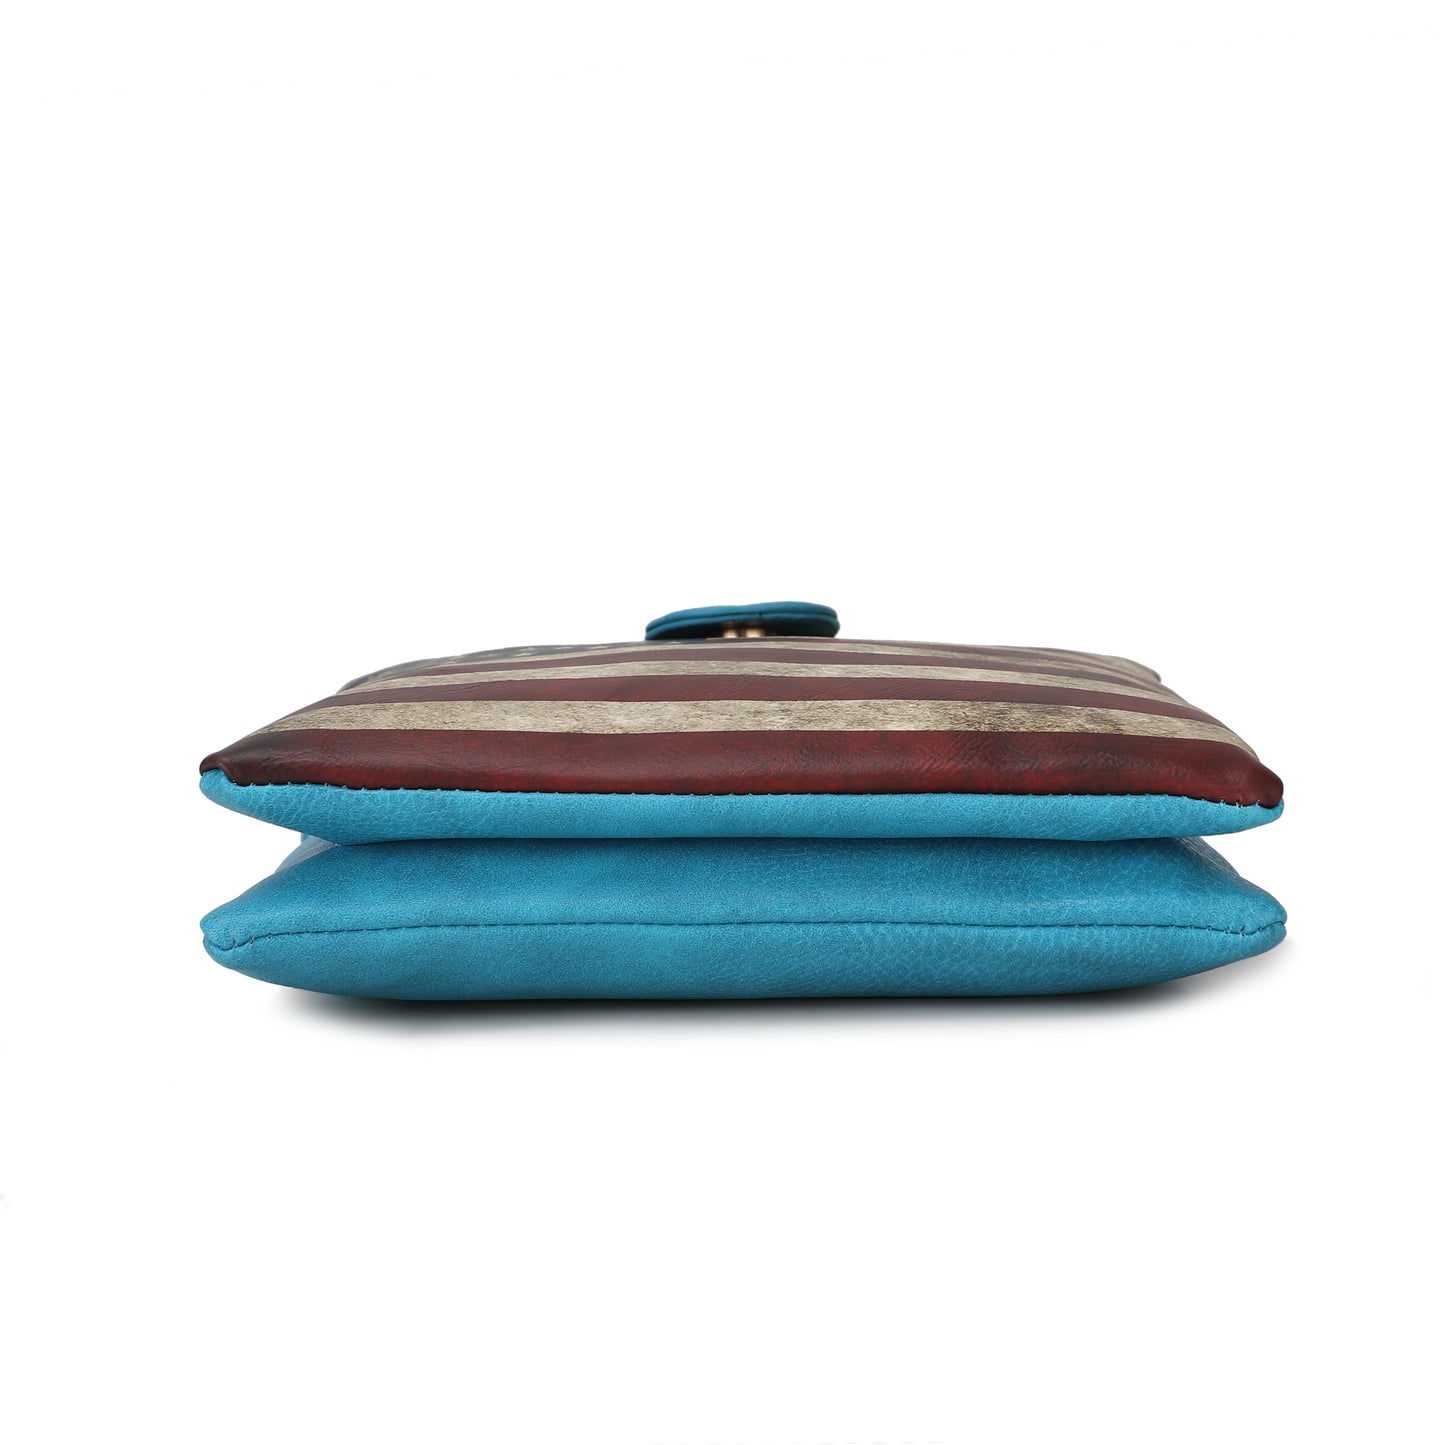 A Blue and brown striped Josephine Vegan Leather Women FLAG Crossbody Bag by Pink Orpheus is stacked on top of each other.